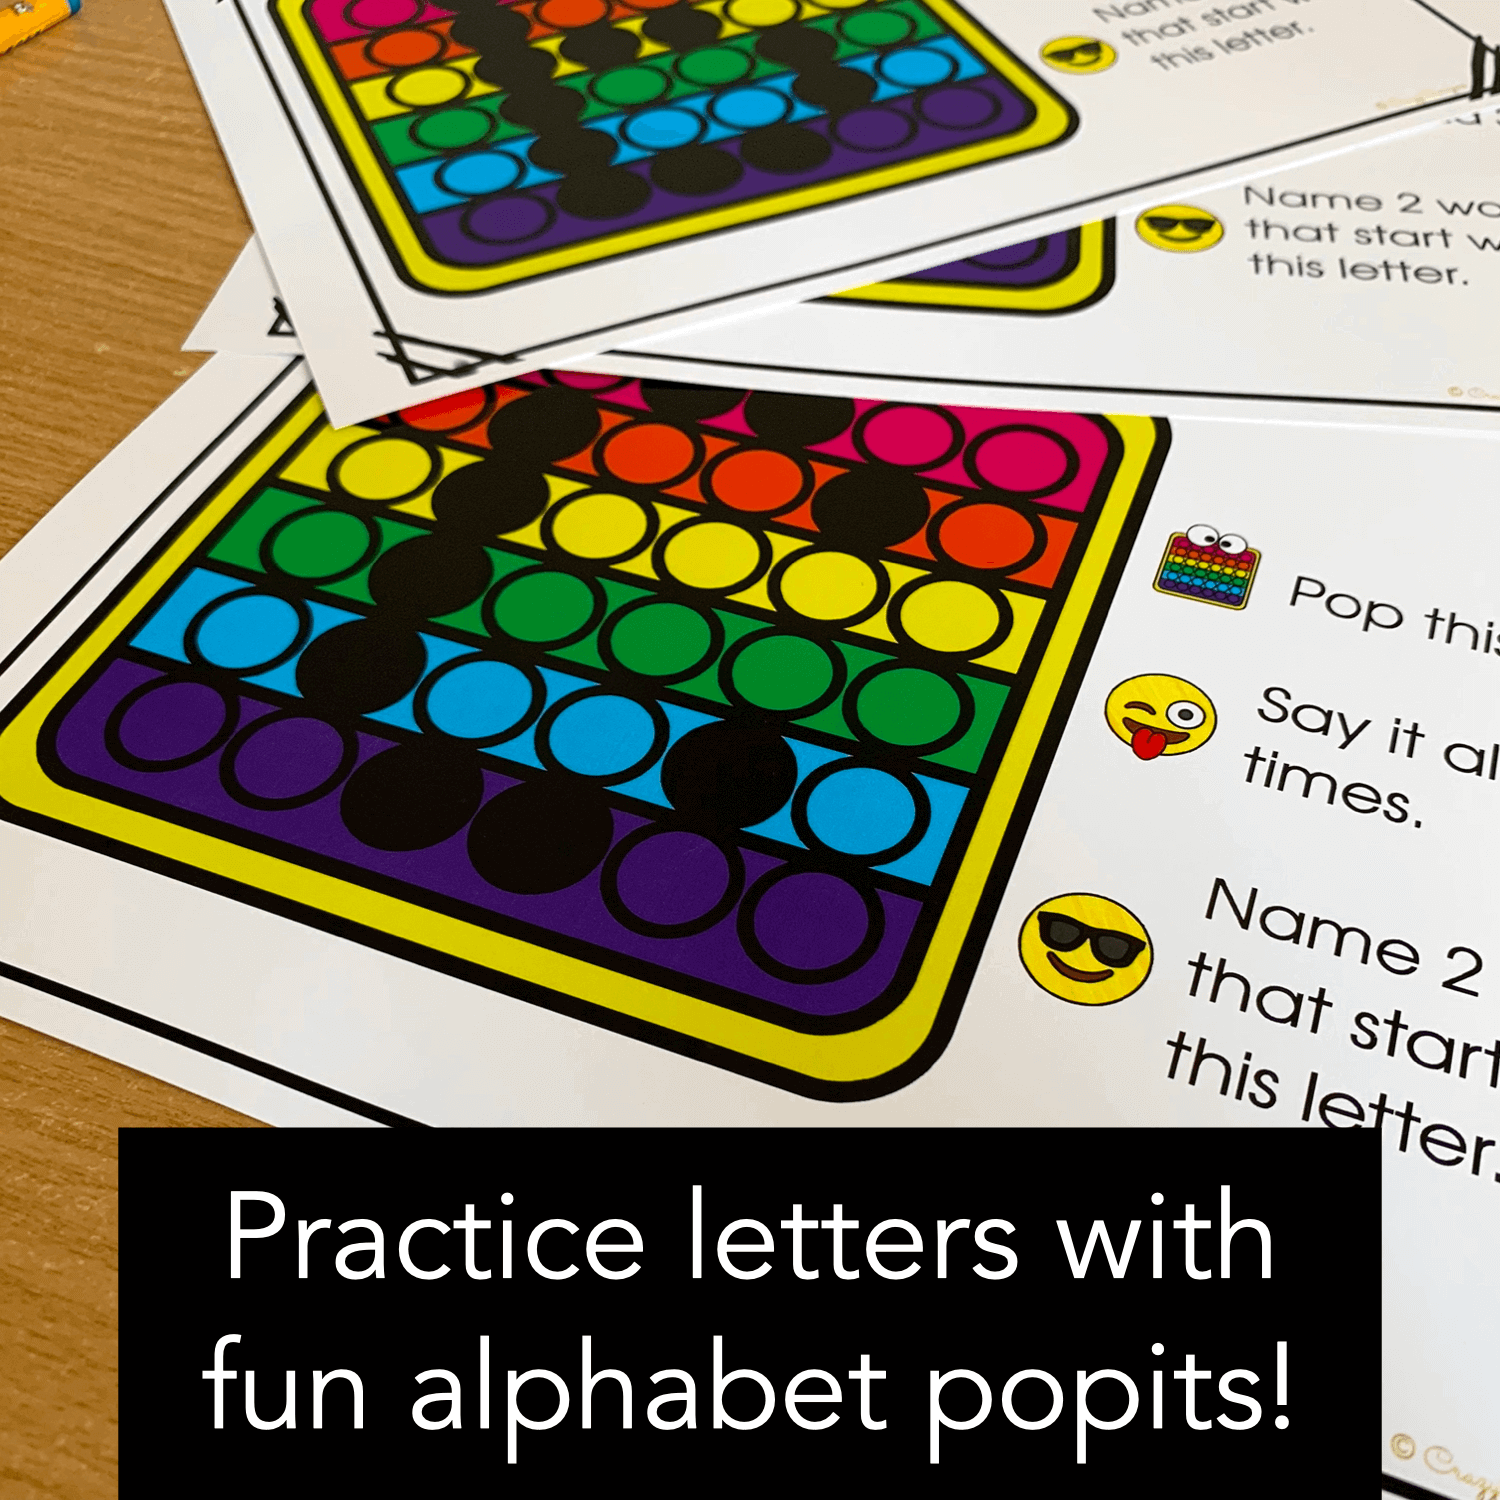 activities and practice upper and lower case letters